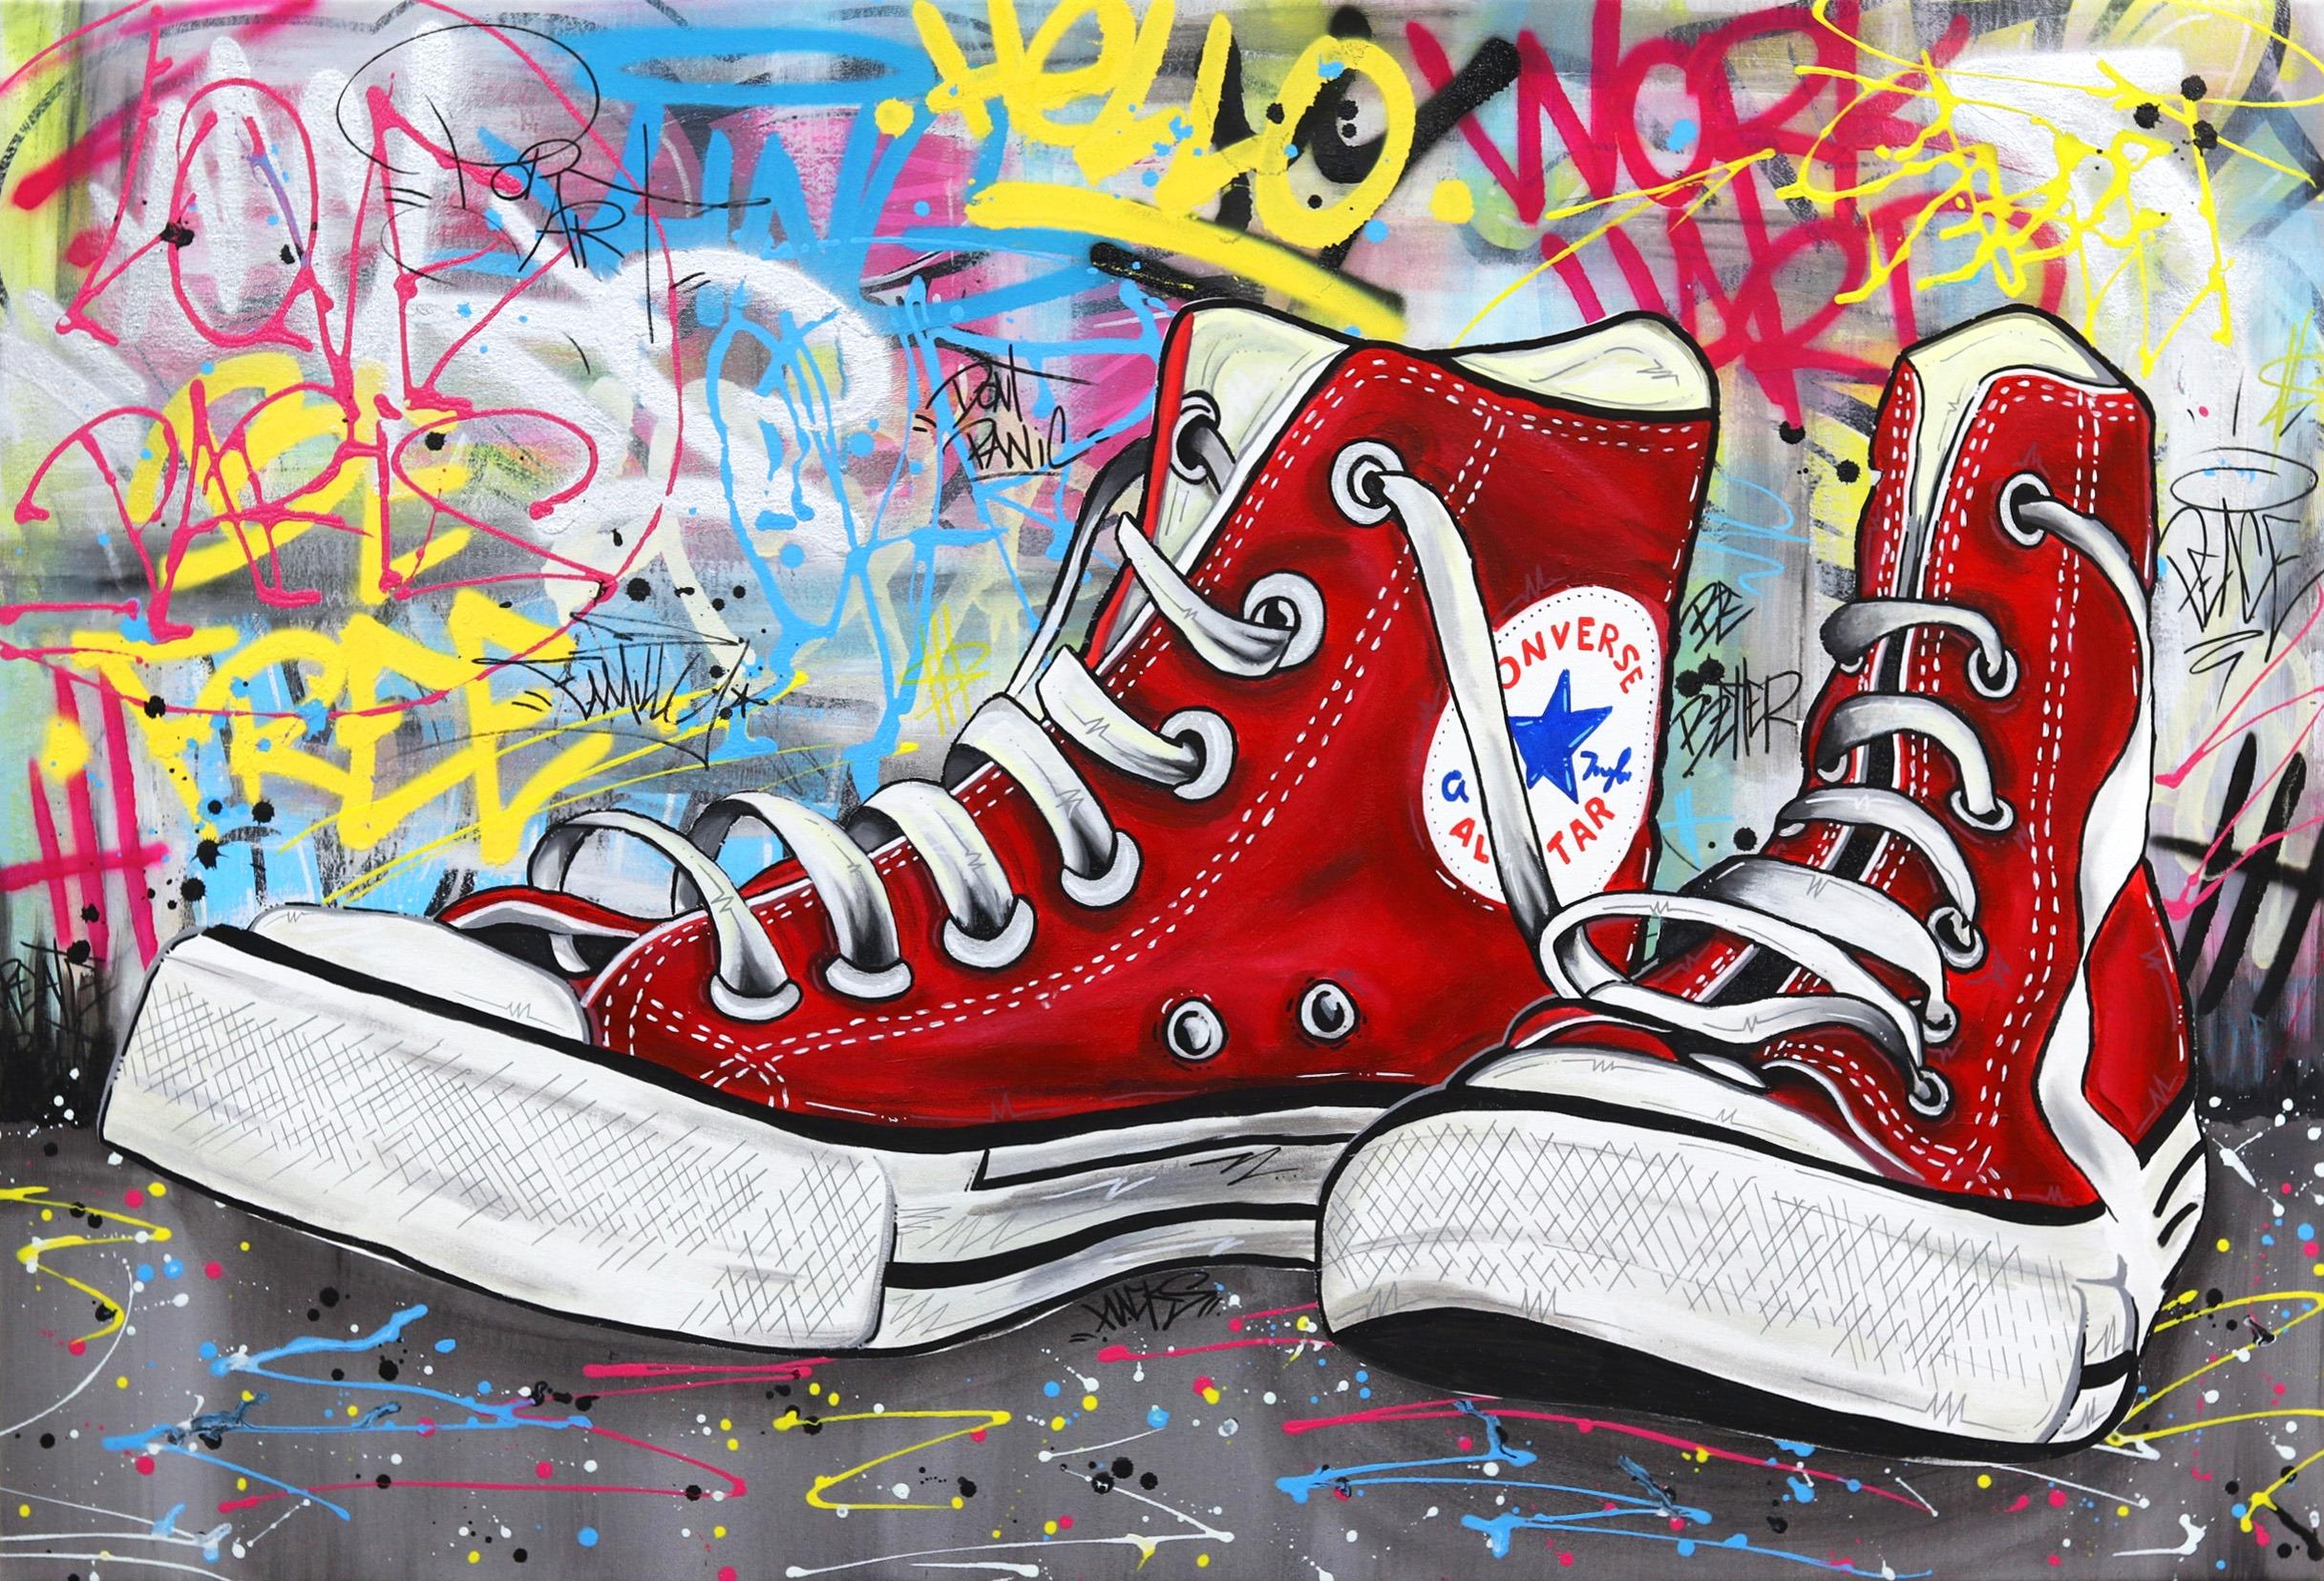 All Star - Original Converse Shoes Street Art Painting on Canvas